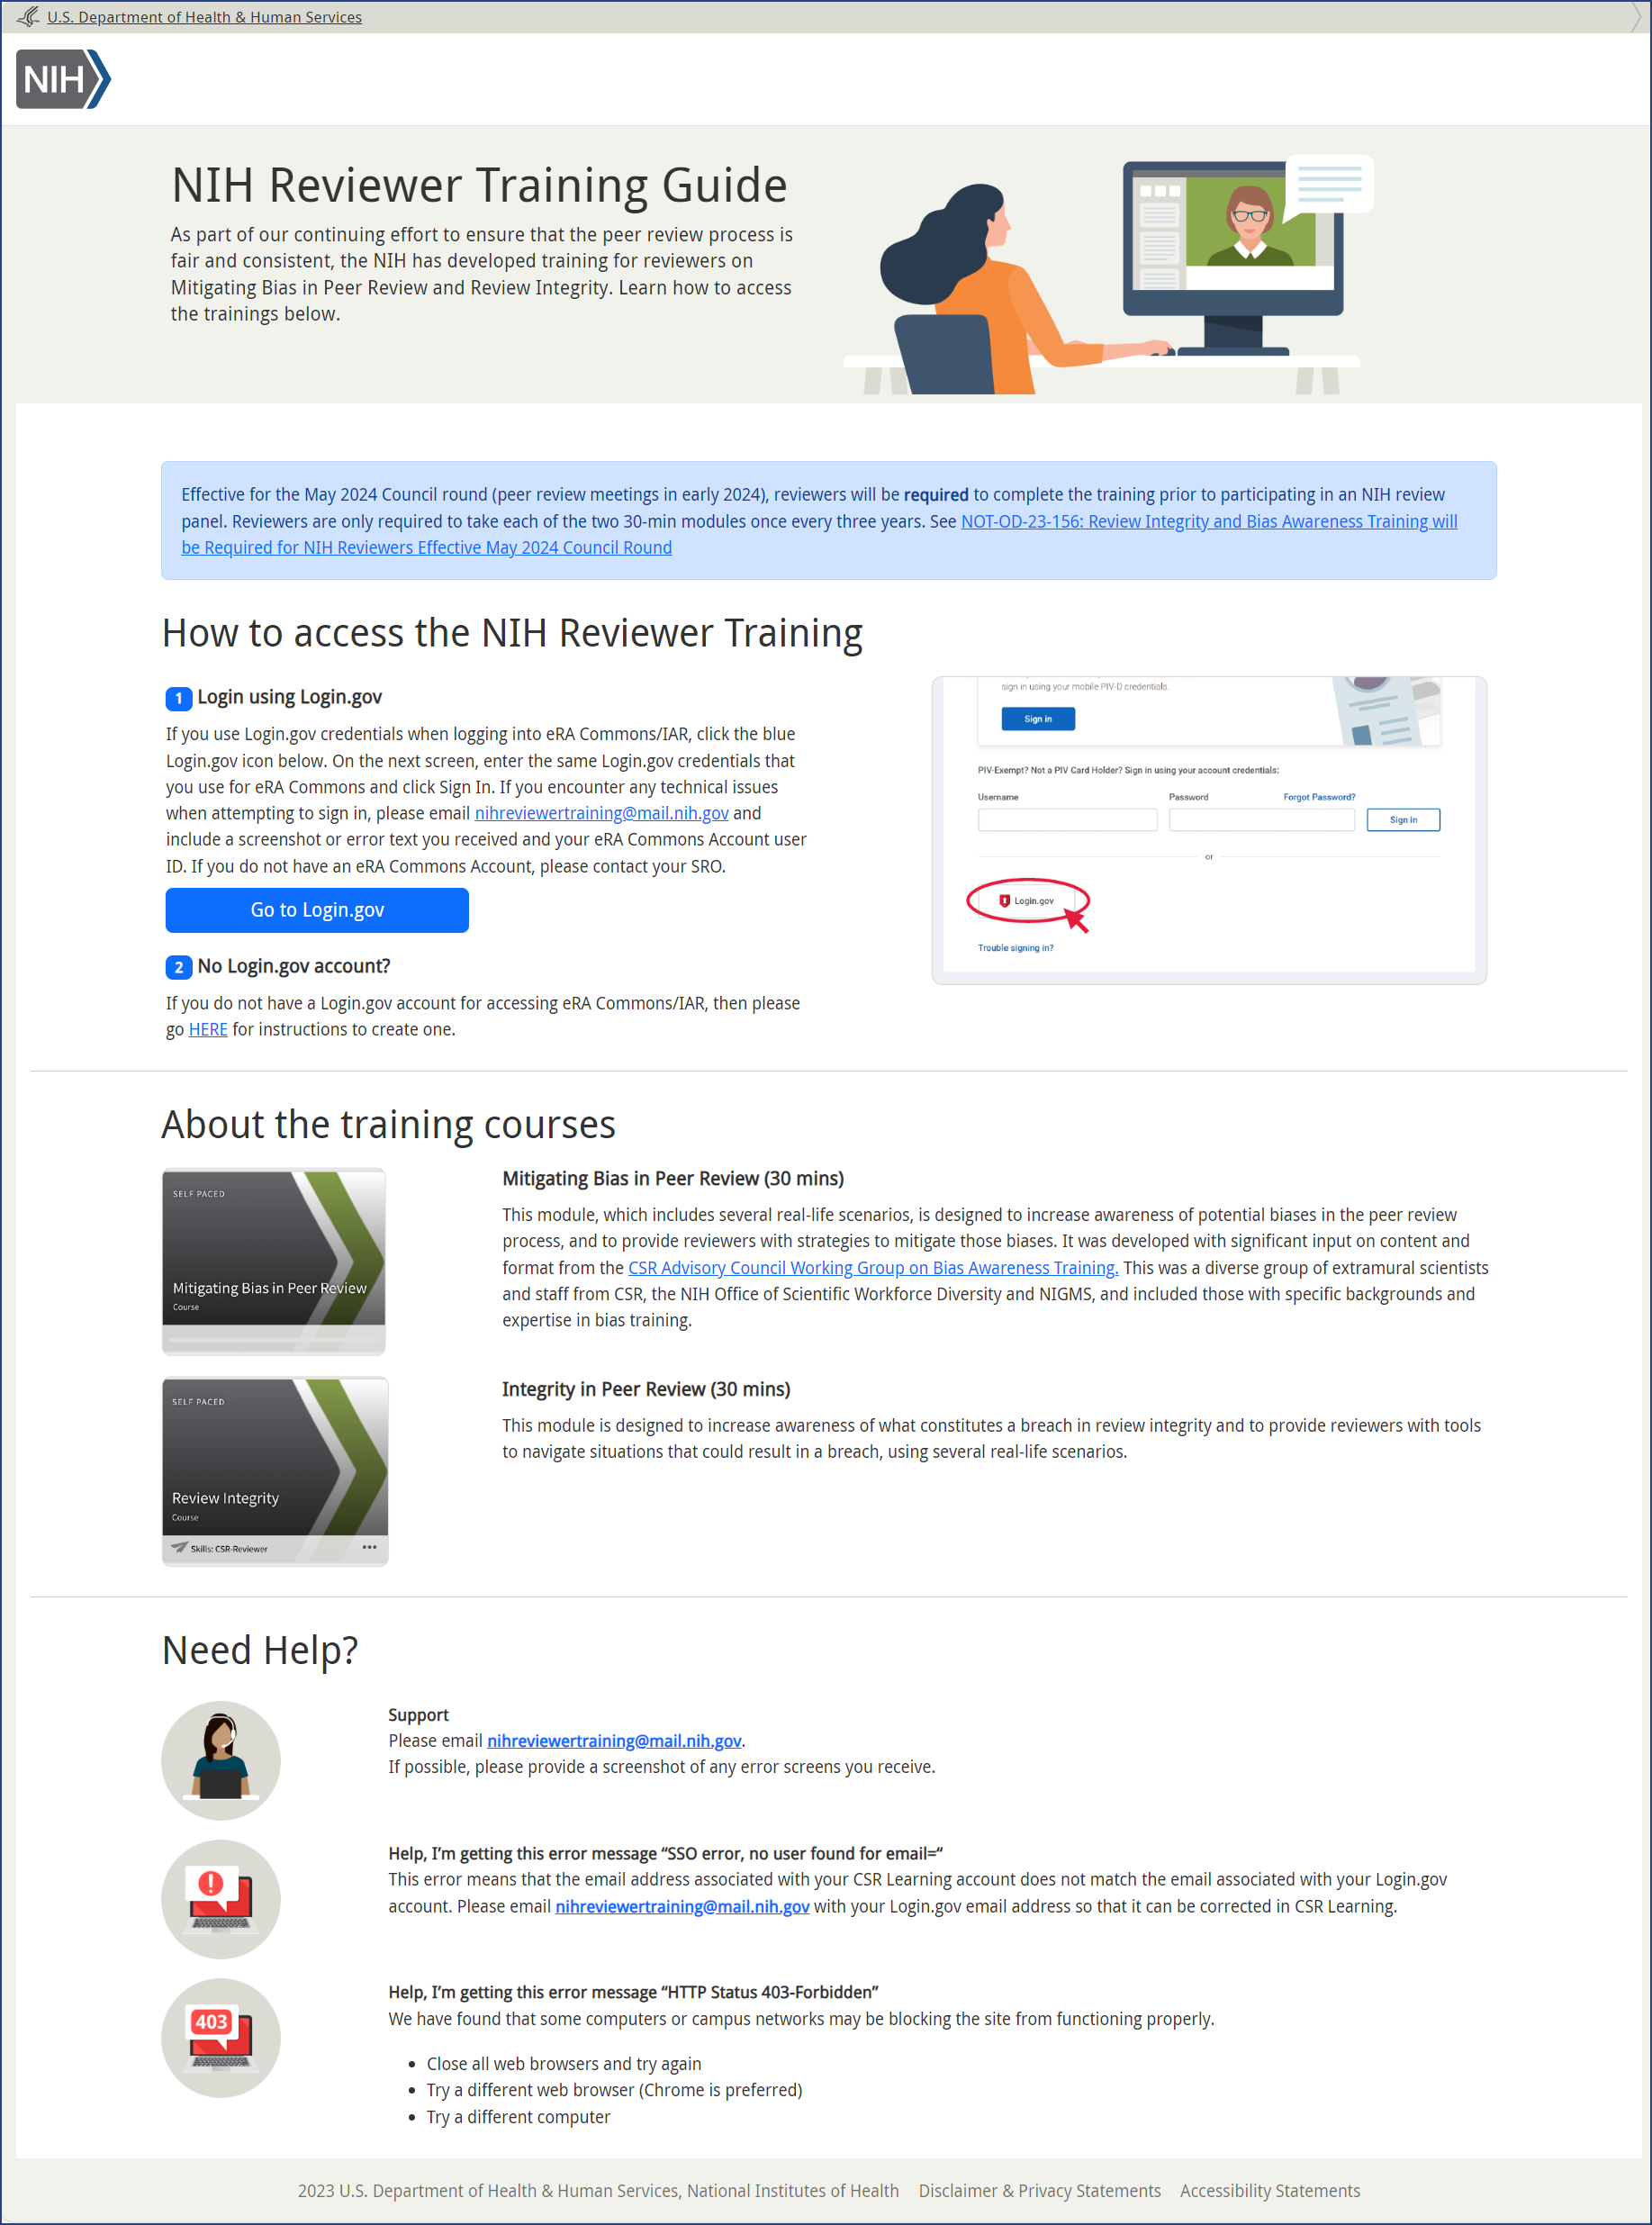 Figure 1: Screenshot of the NIH Reviewer Training site